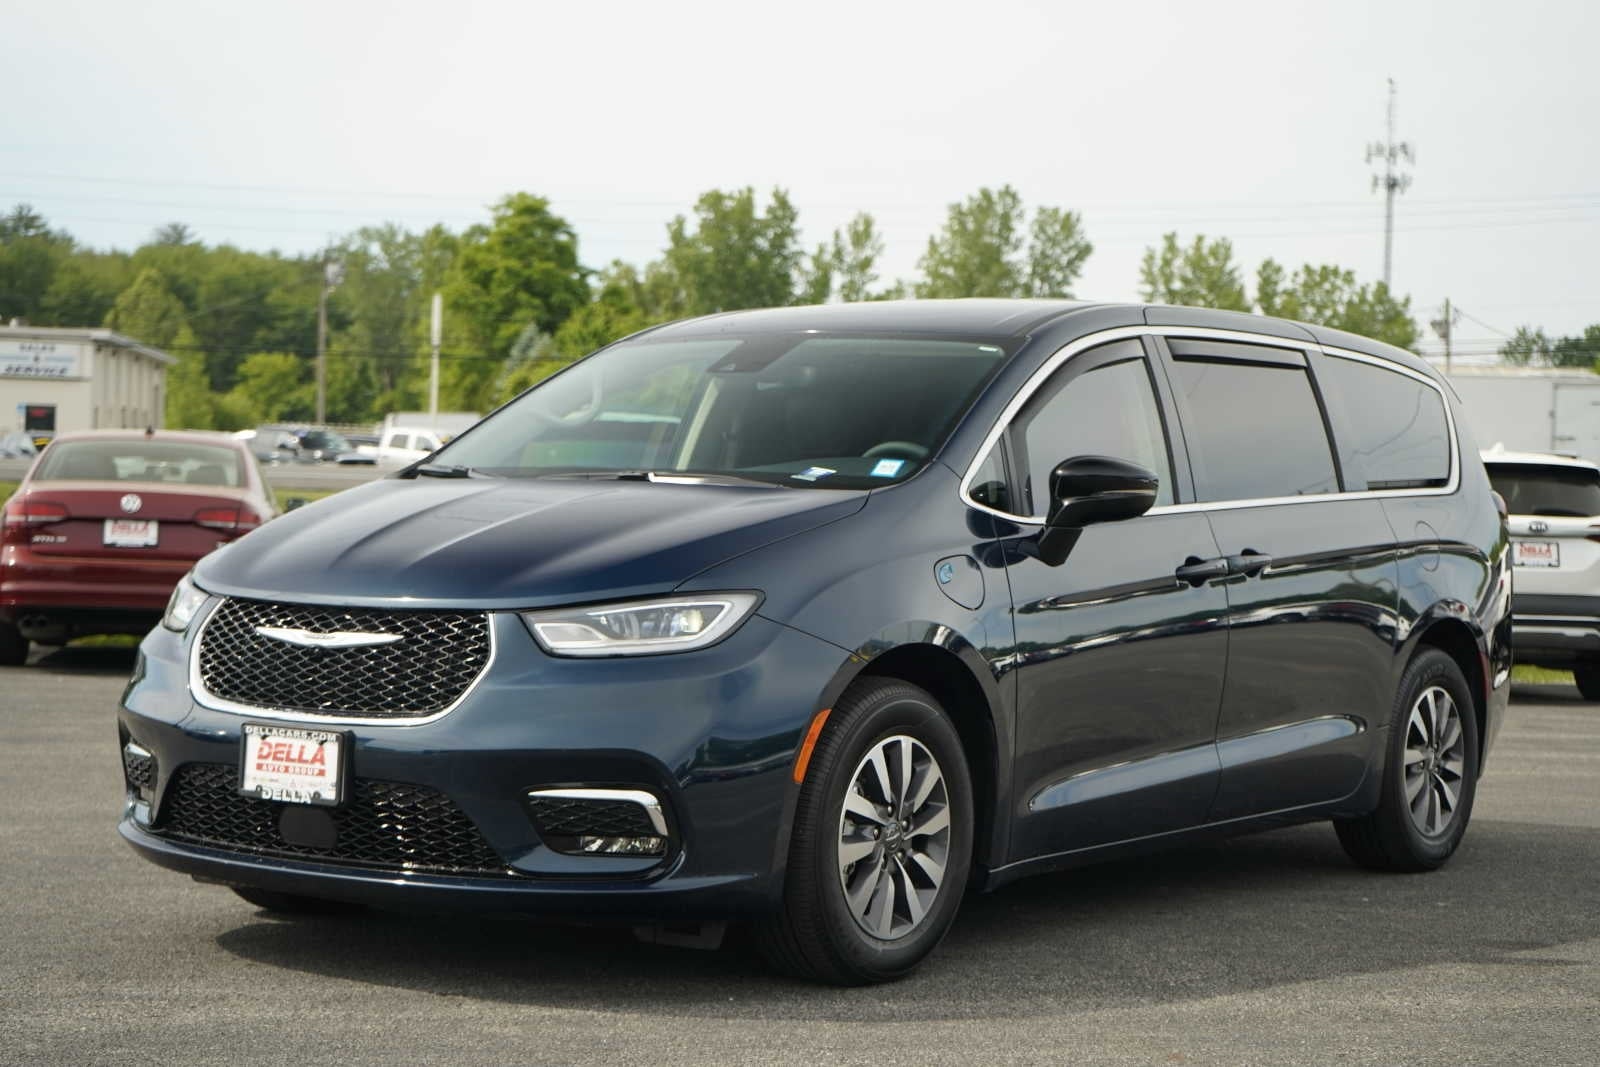 2024 Chrysler Pacifica Hybrid Select FWD